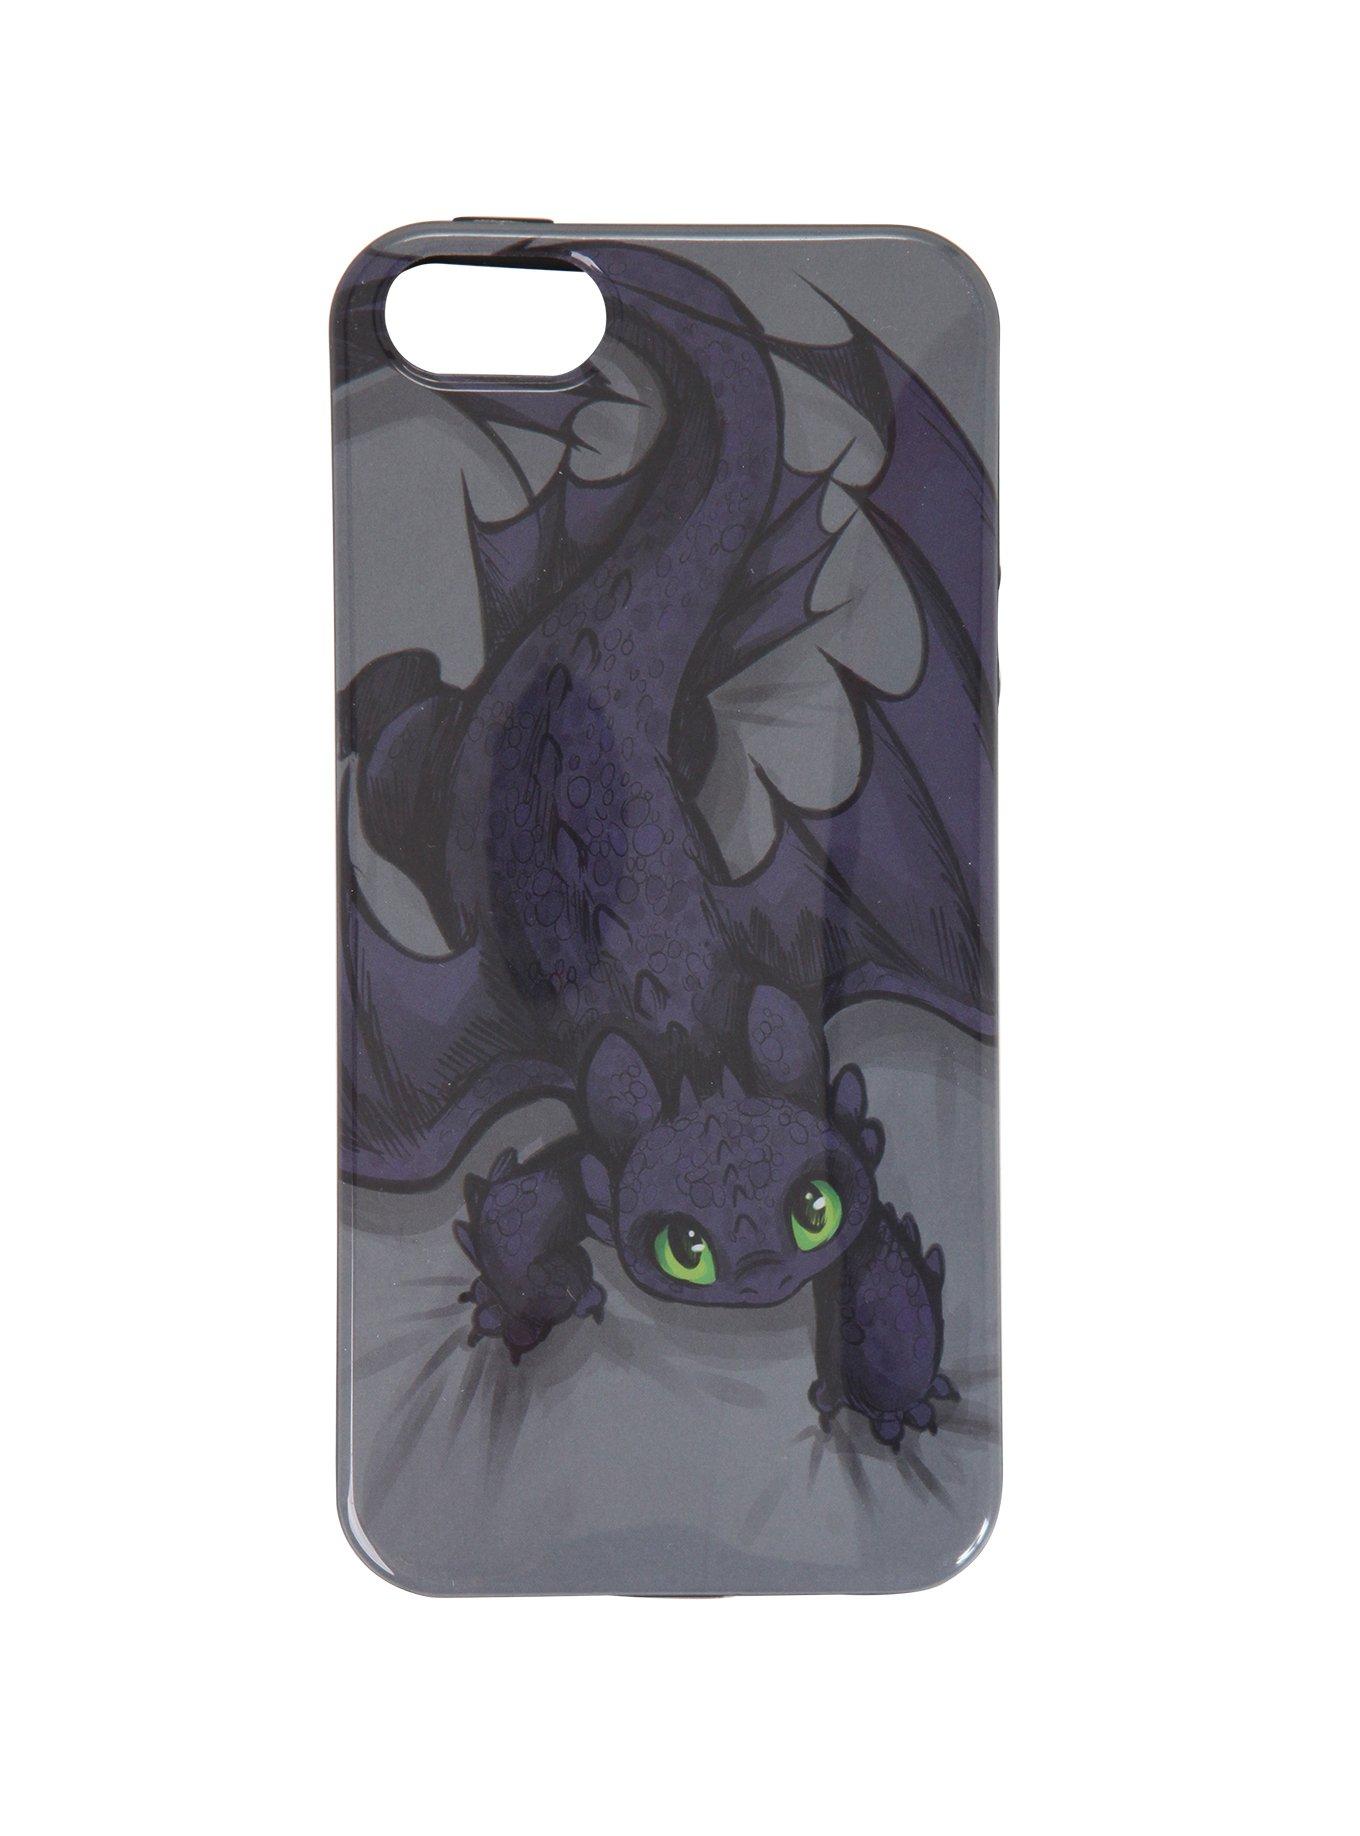 How To Train Your Dragon Toothless Crawling iPhone 5 Case, , hi-res